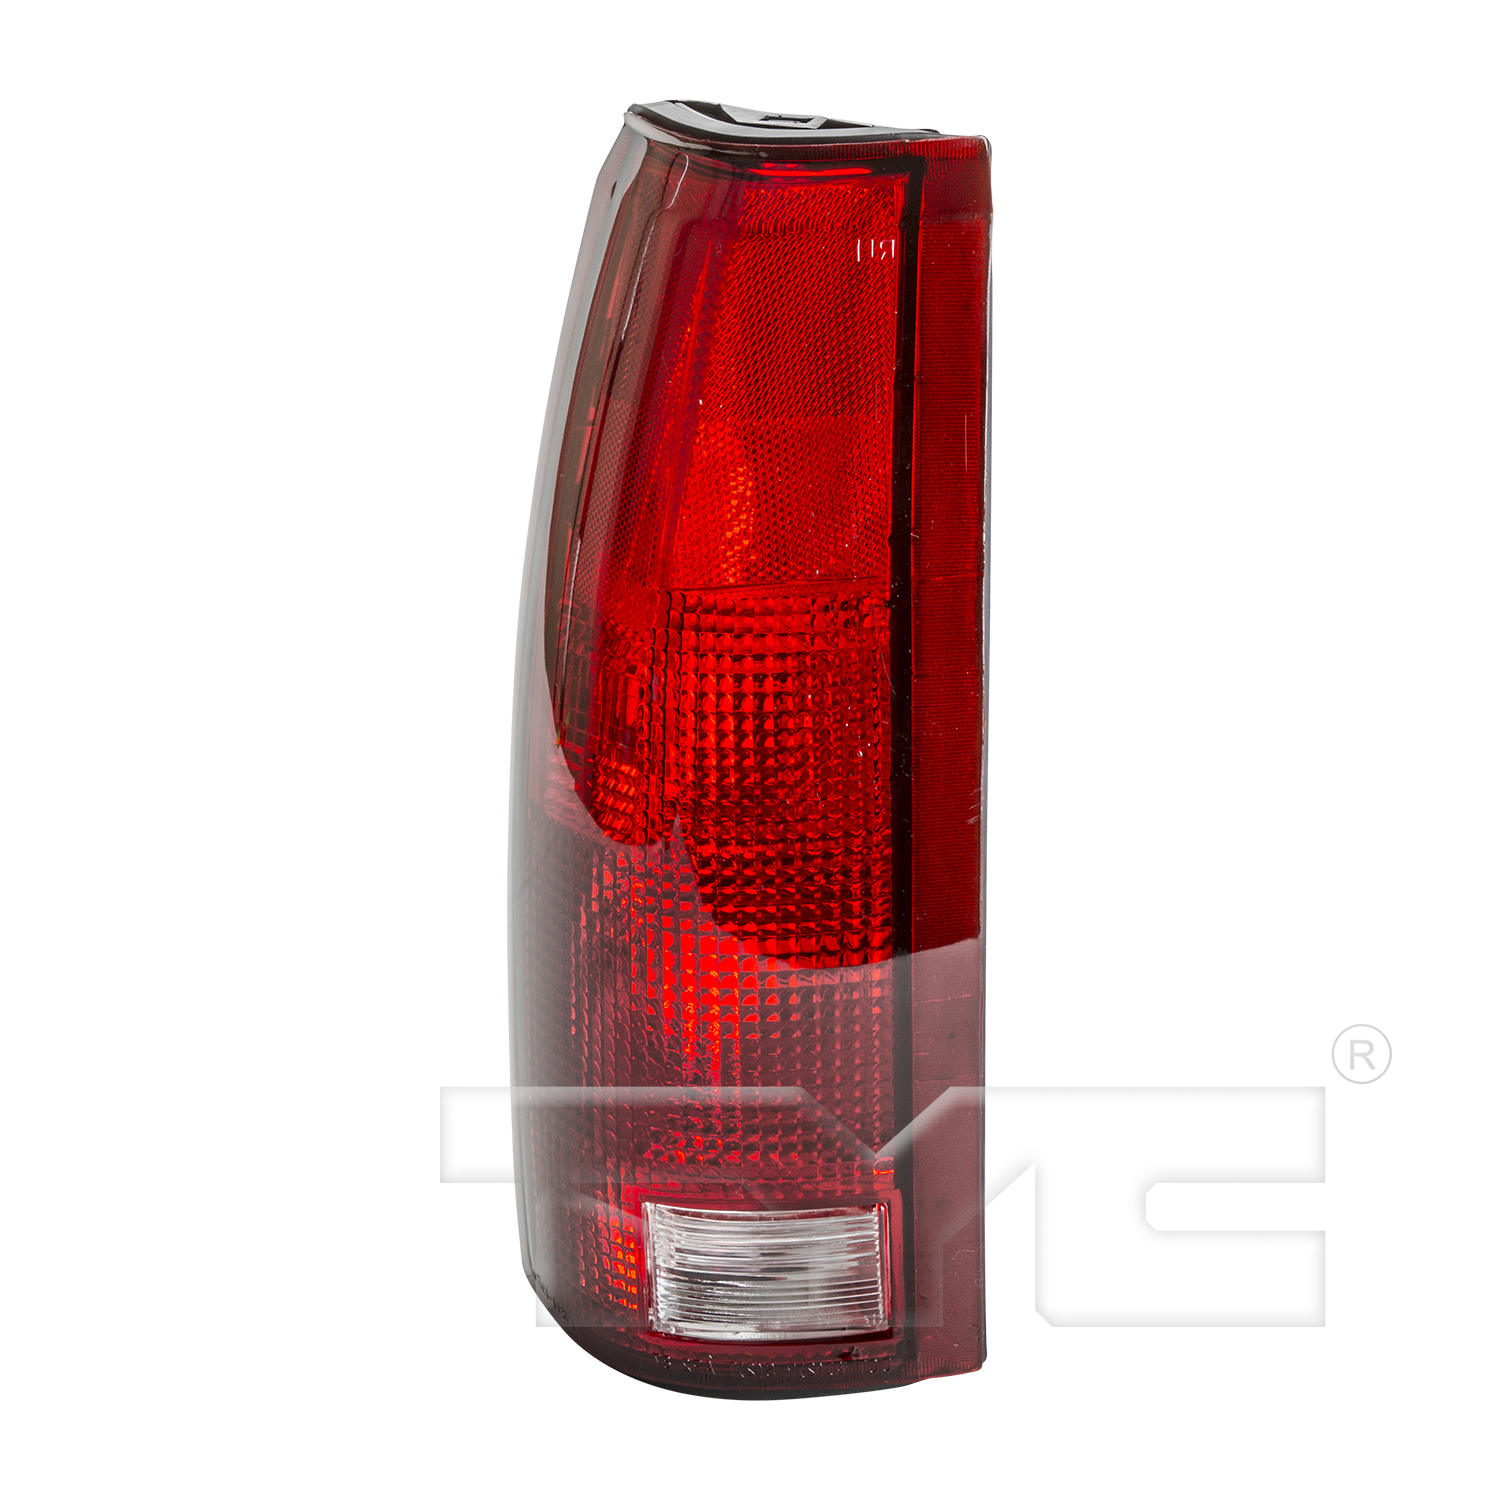 Aftermarket TAILLIGHTS for CHEVROLET - C2500 SUBURBAN, C2500 SUBURBAN,92-99,LT Taillamp lens